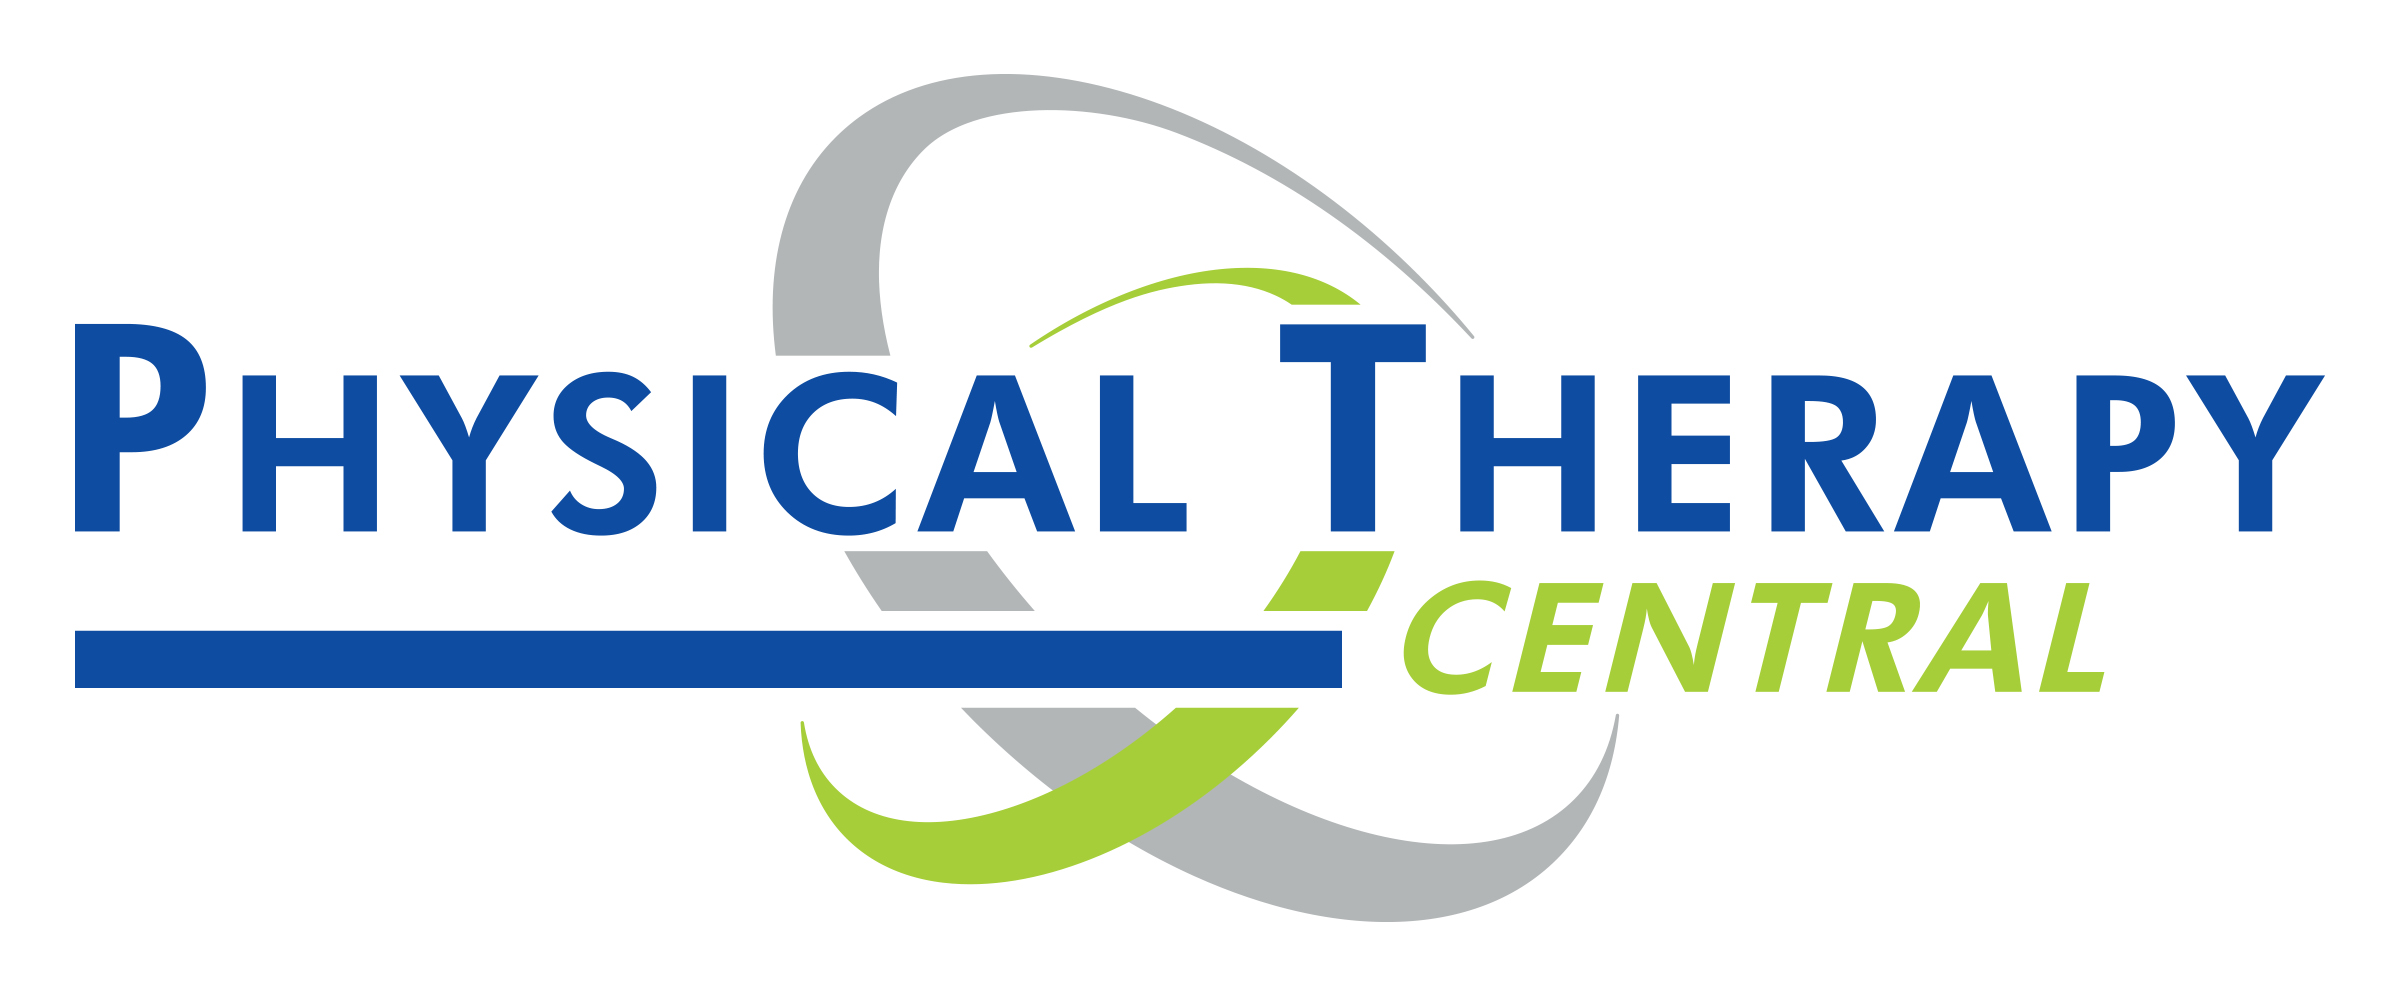 Physical Therapy Central-Davis (201 W Main St)